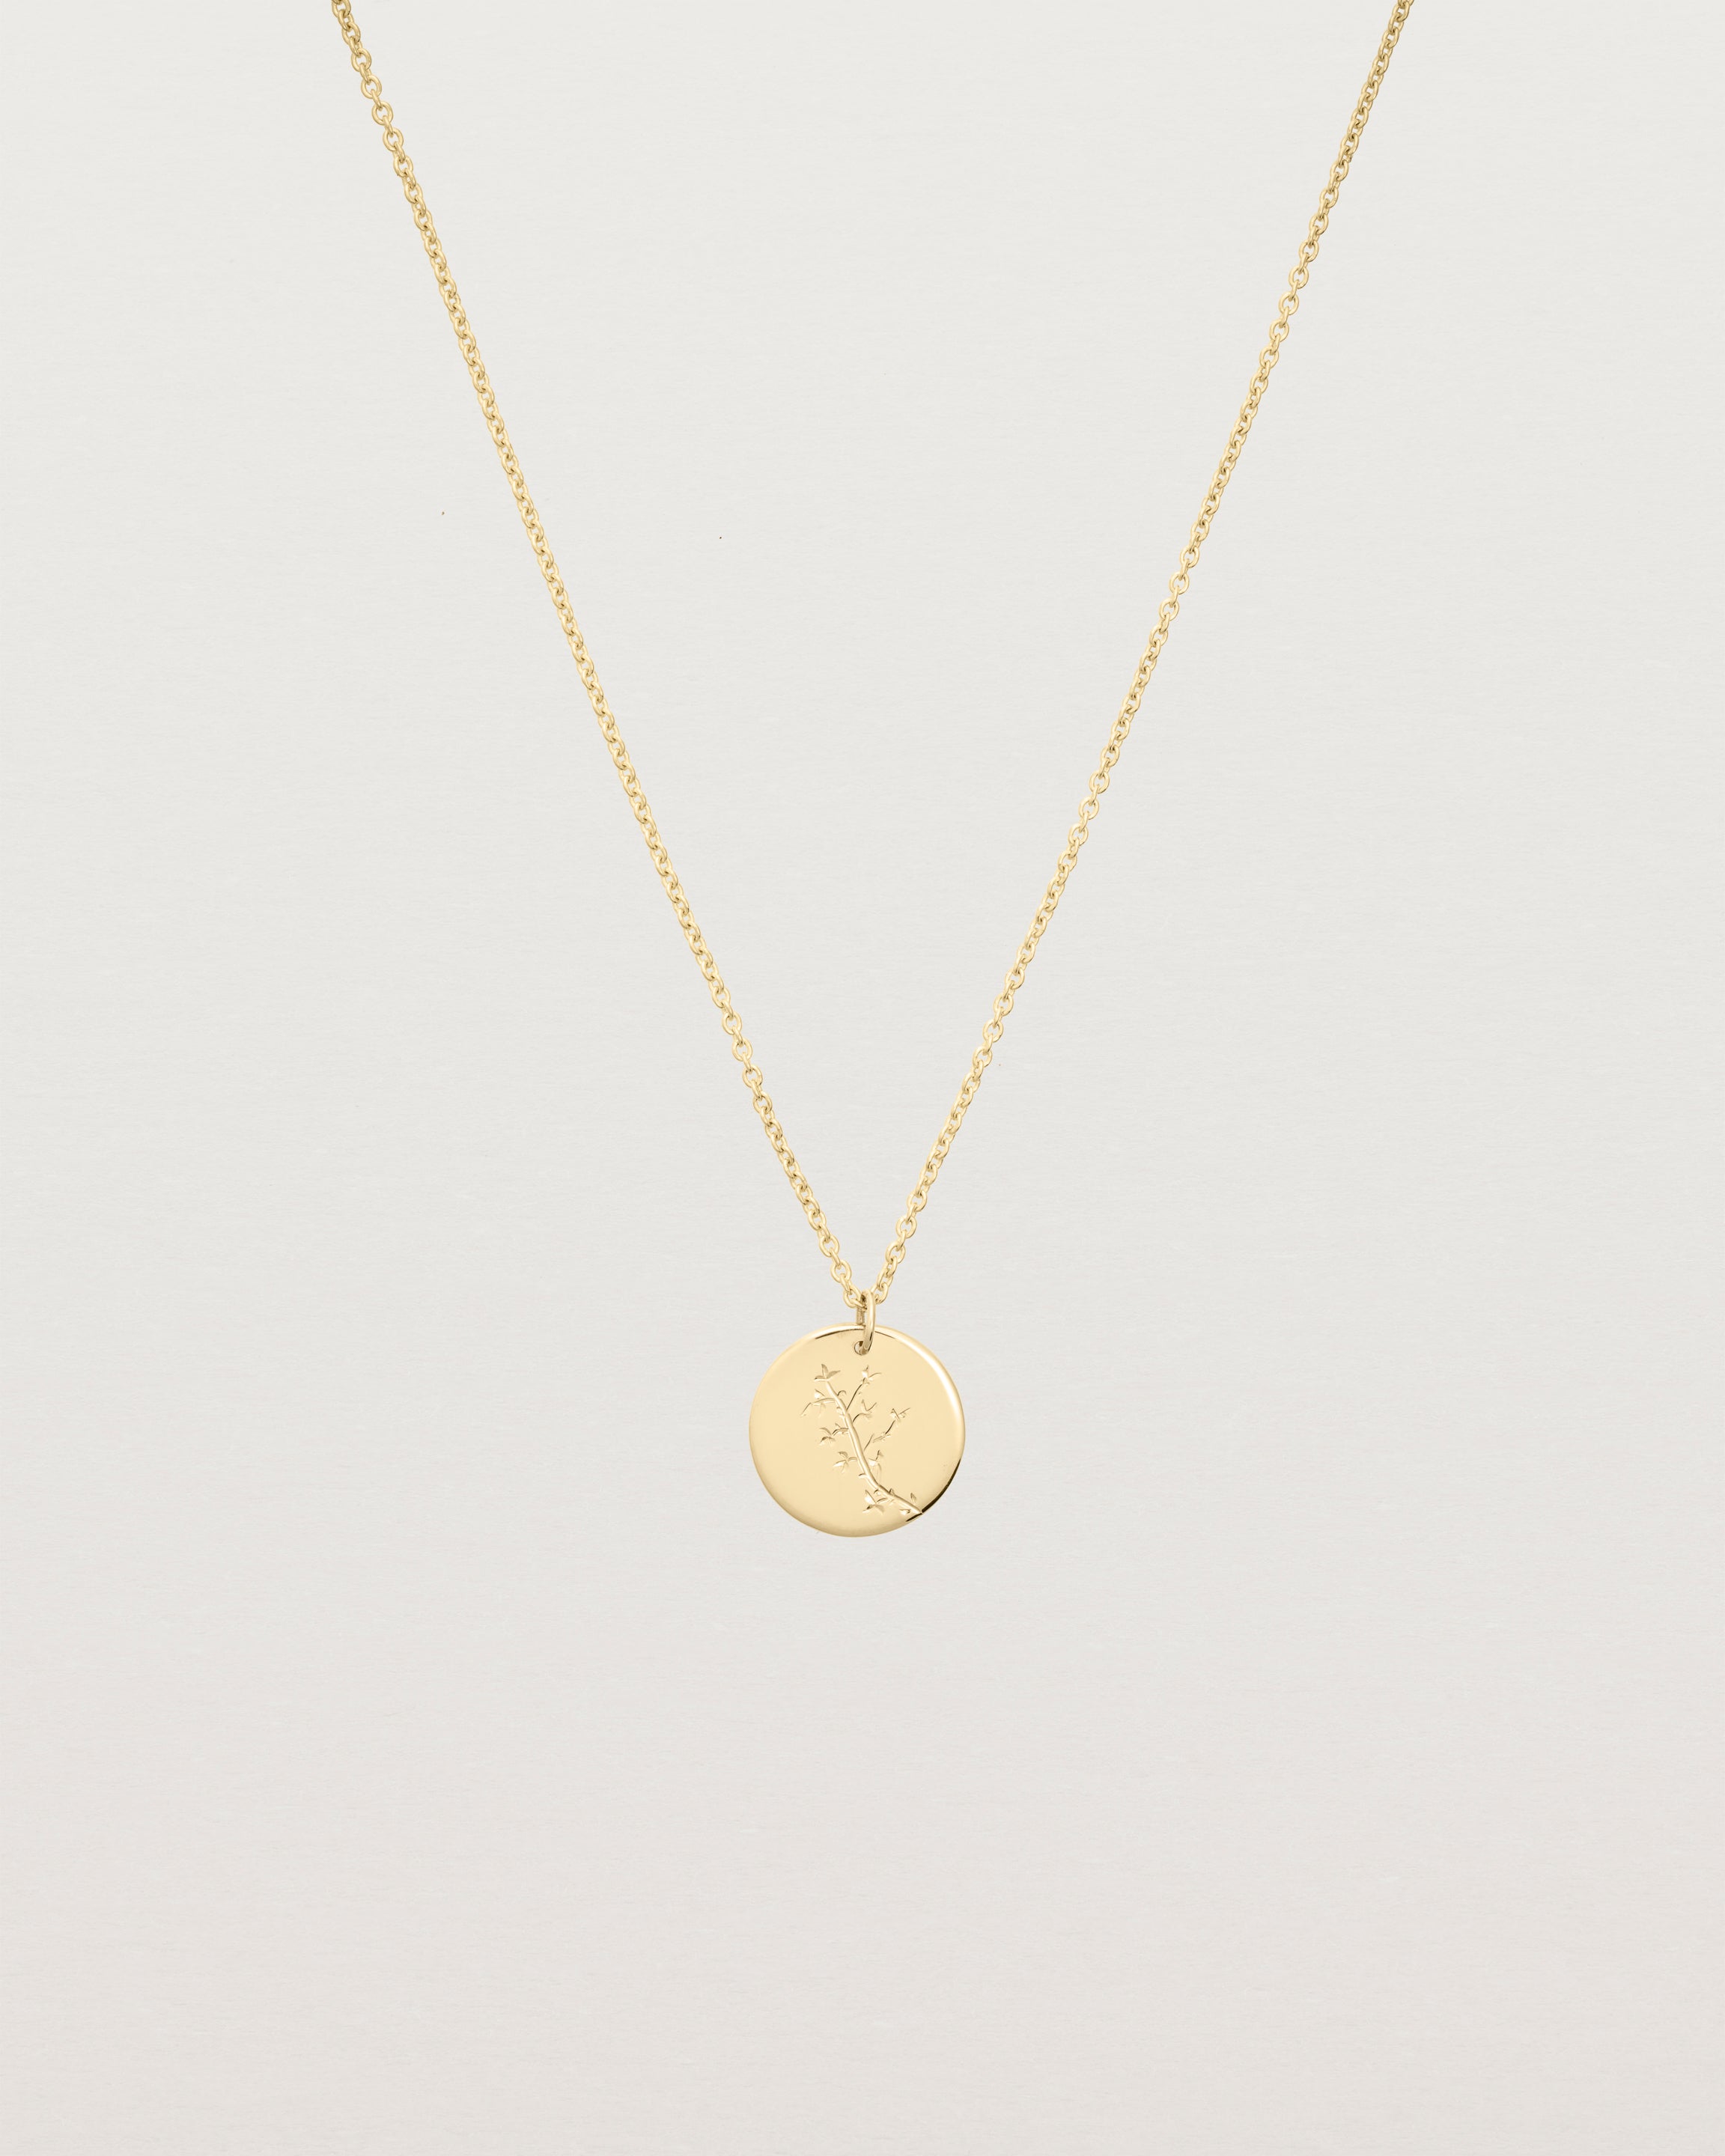 yellow gold engraved necklace with a botanical vine engraving